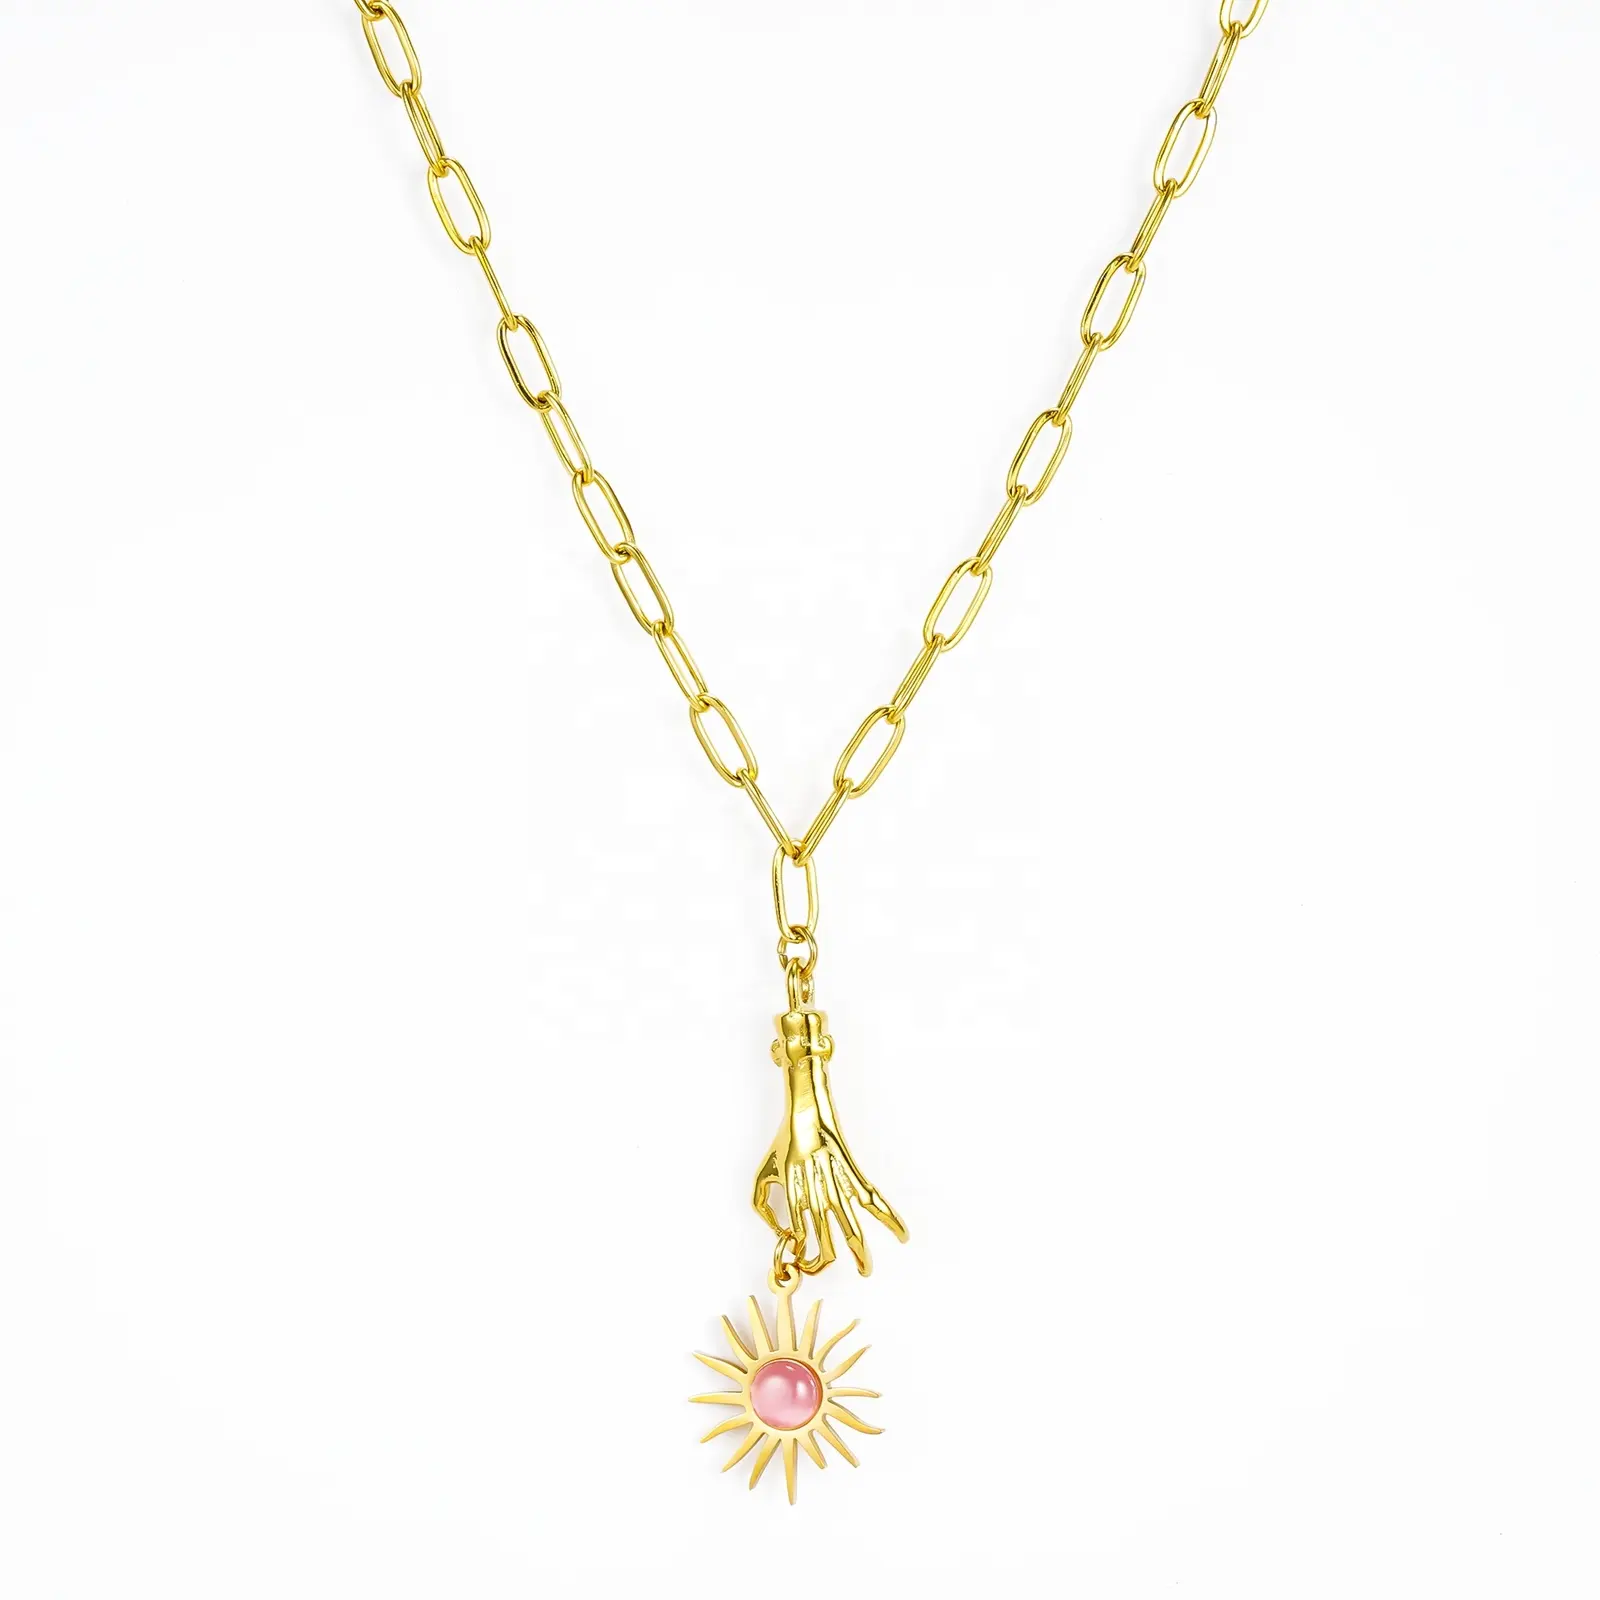 Wholesale Fashion Jewelry 18K Gold Plated Stainless Steel PaperClip Chain Hand Holding Sun Flower Opal Pendant Necklace Women